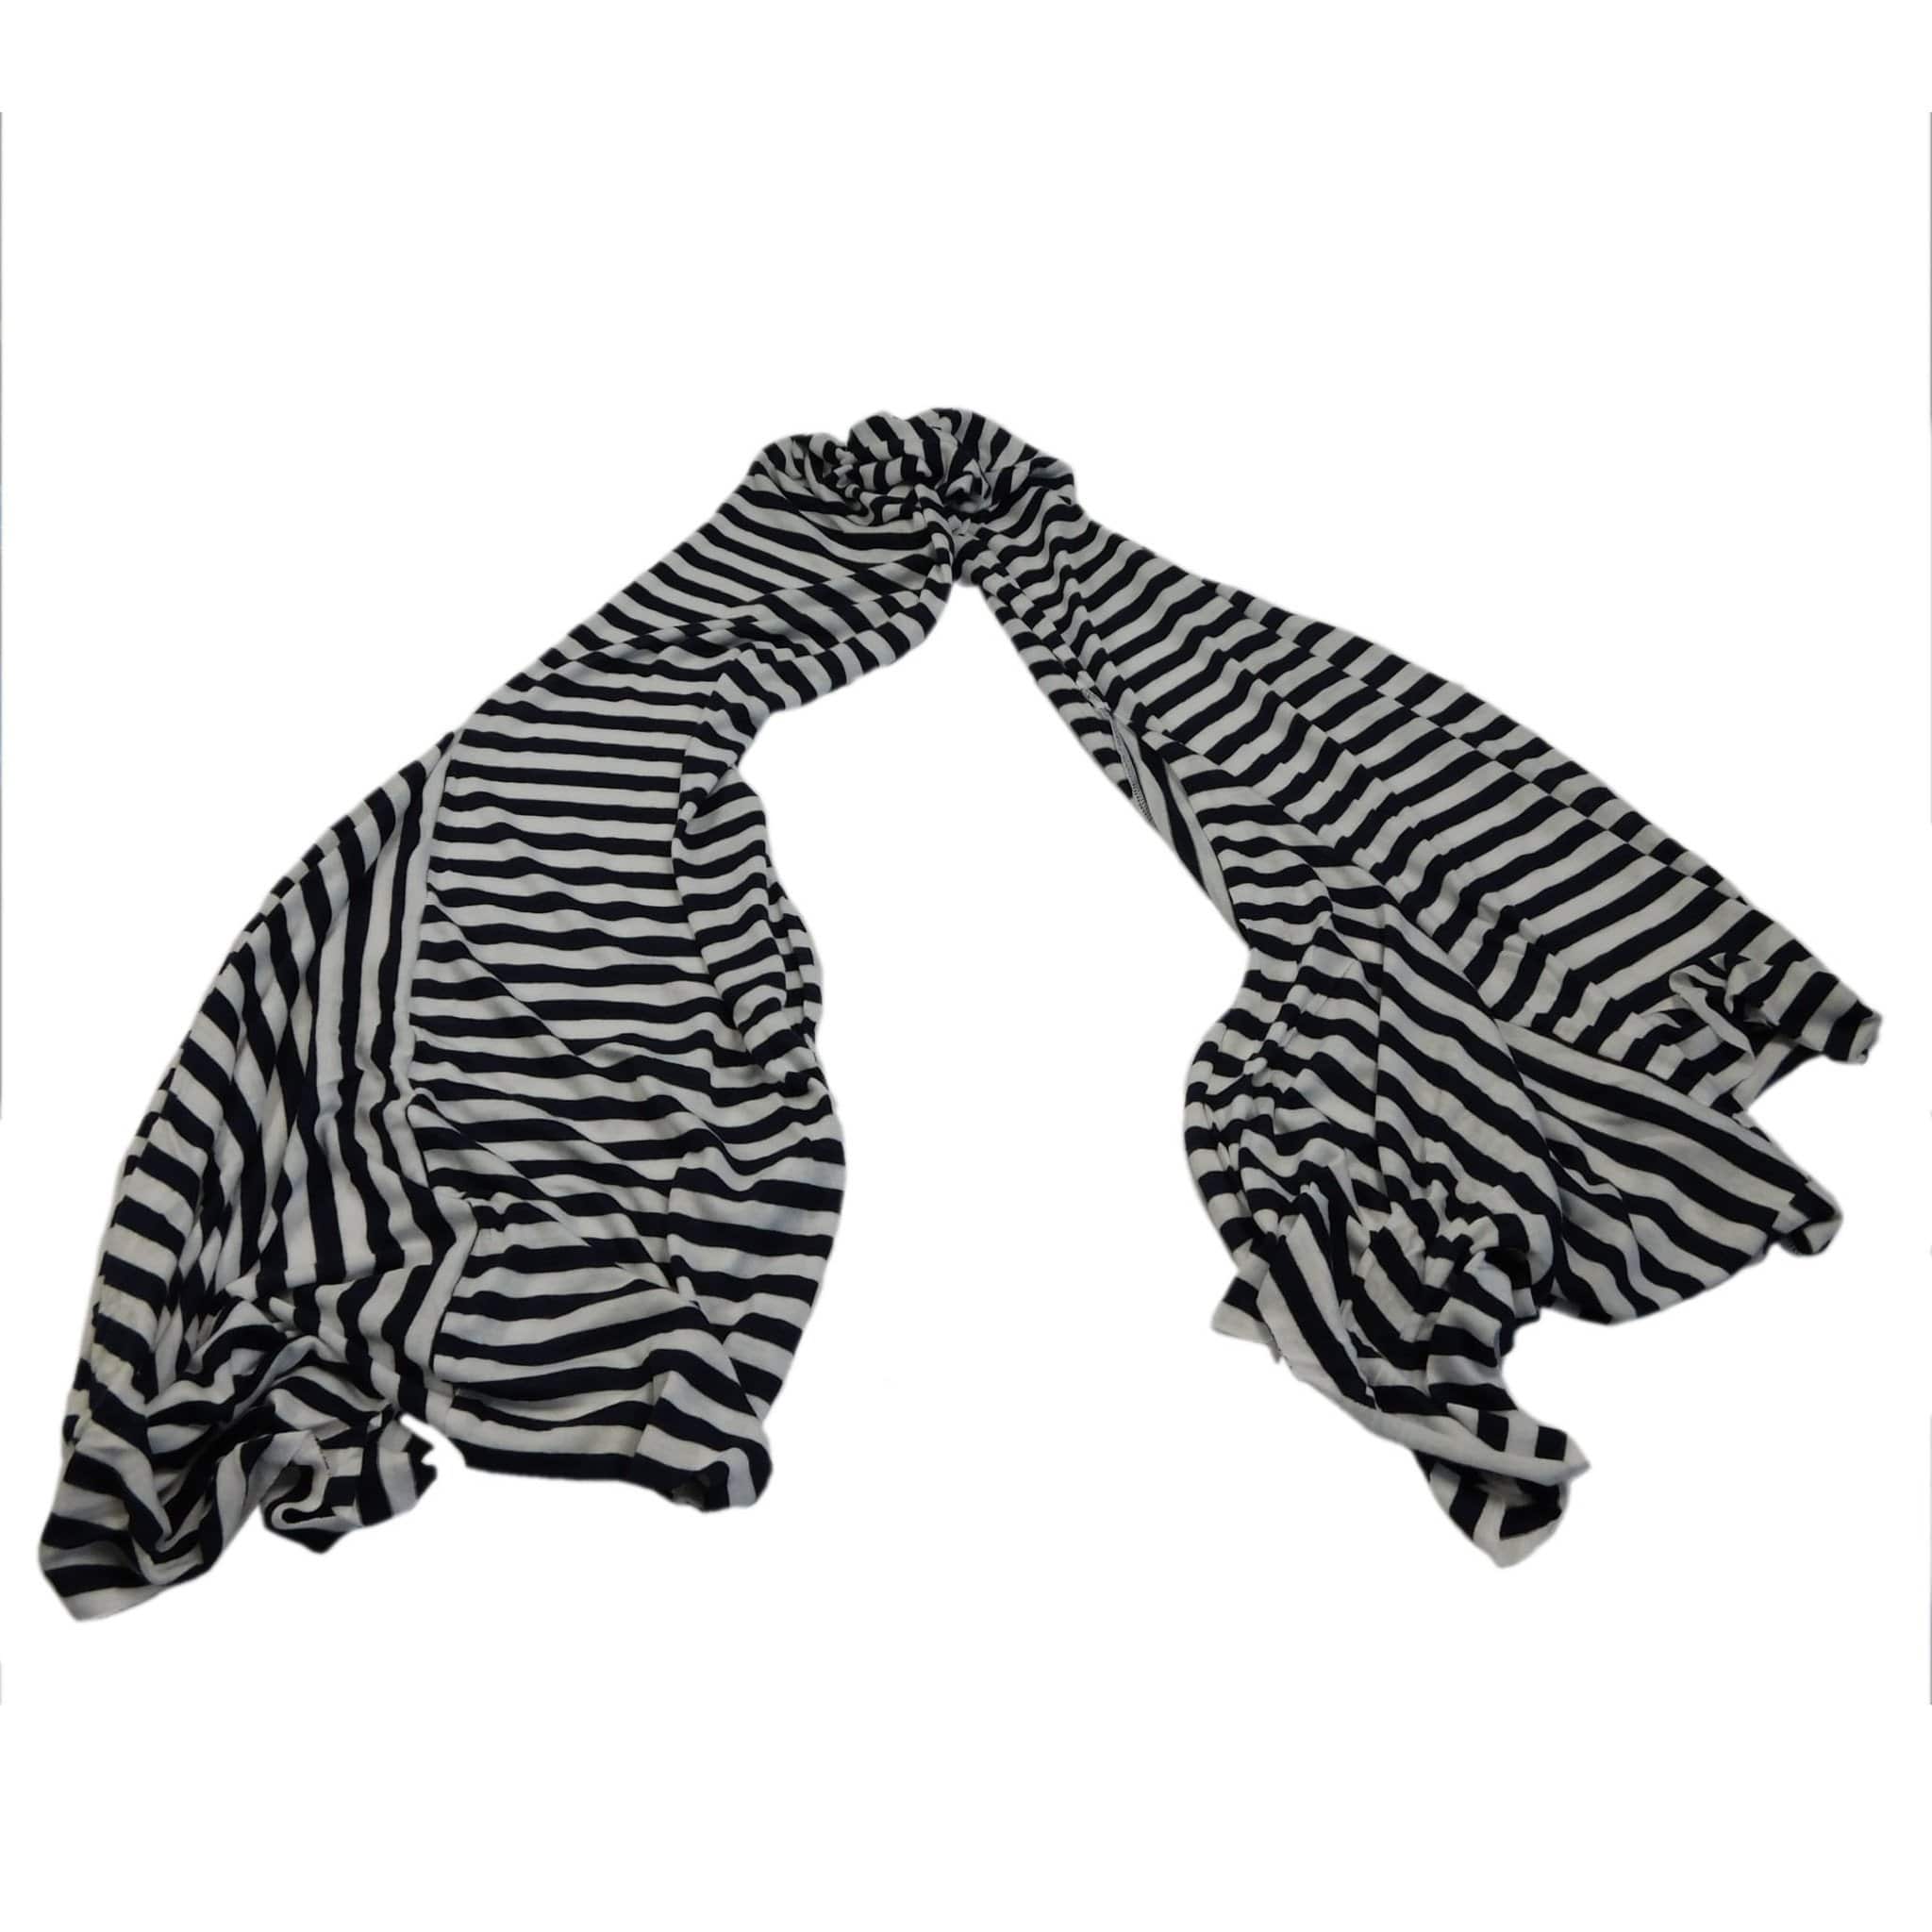 Navy and White Striped Scarf Scarves SCrane Wscscarf9 Navy and White  